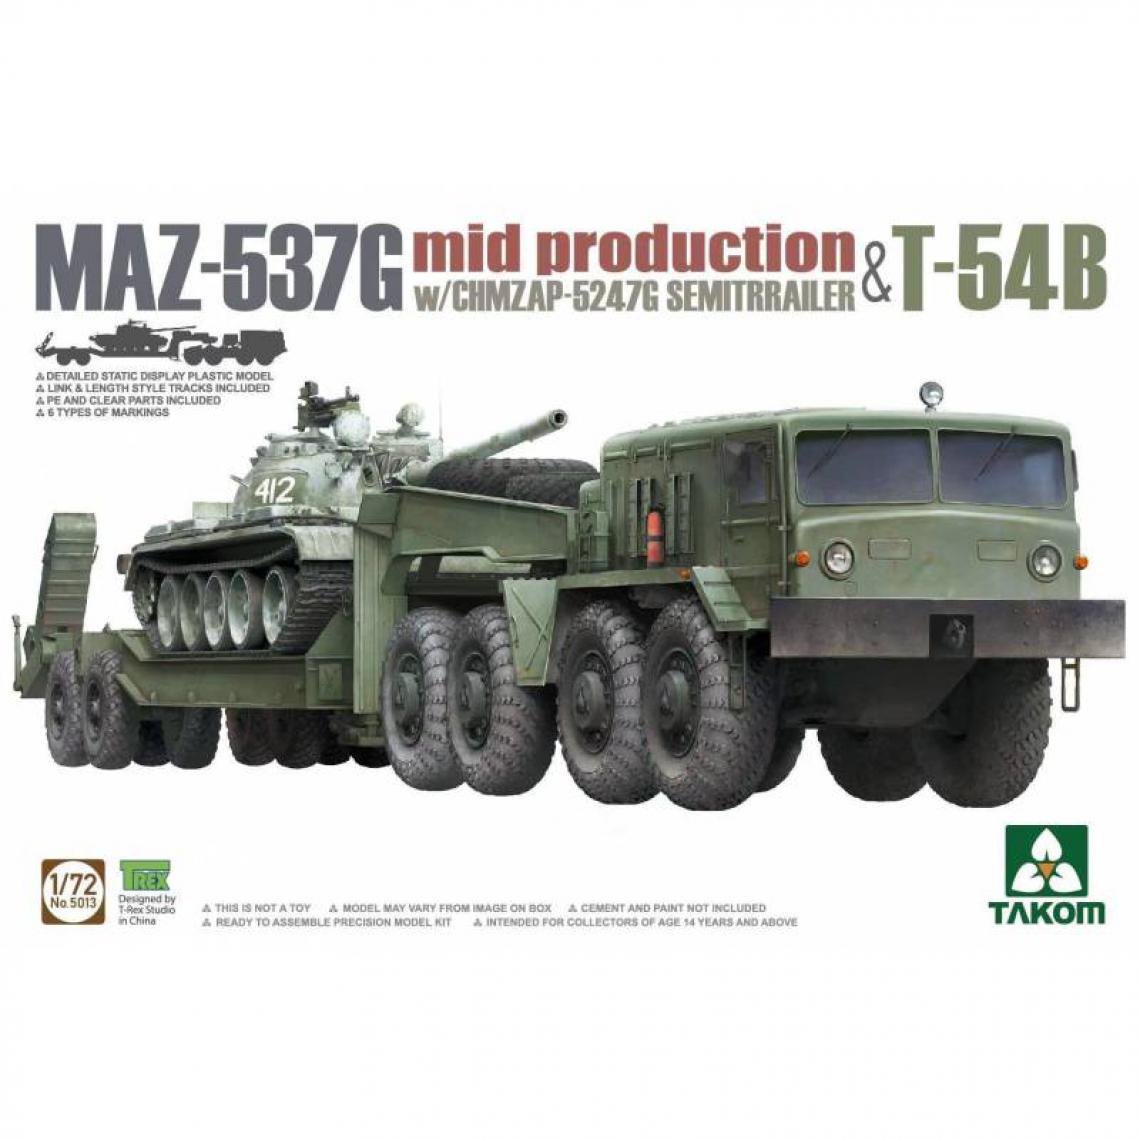 Takom - Maquette Camion Maz-537g Mid Production With Chmzap-5247g Semitrailer & T-54b - Camions